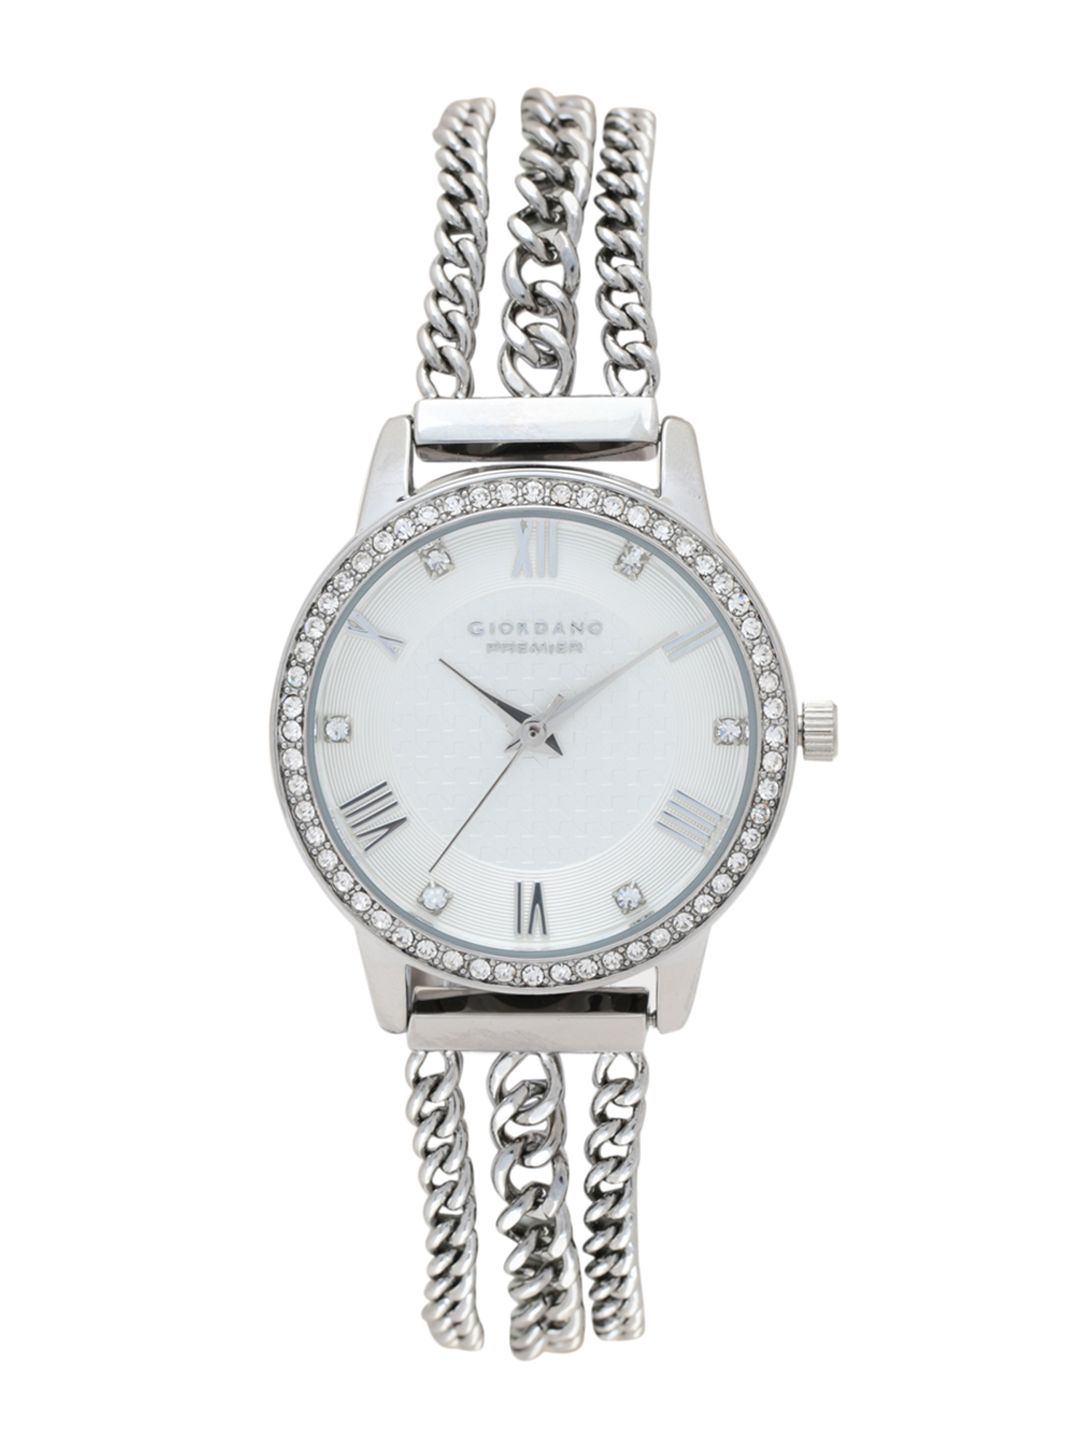 GIORDANO Women Silver-Toned Analogue Watch A2061-11 Price in India